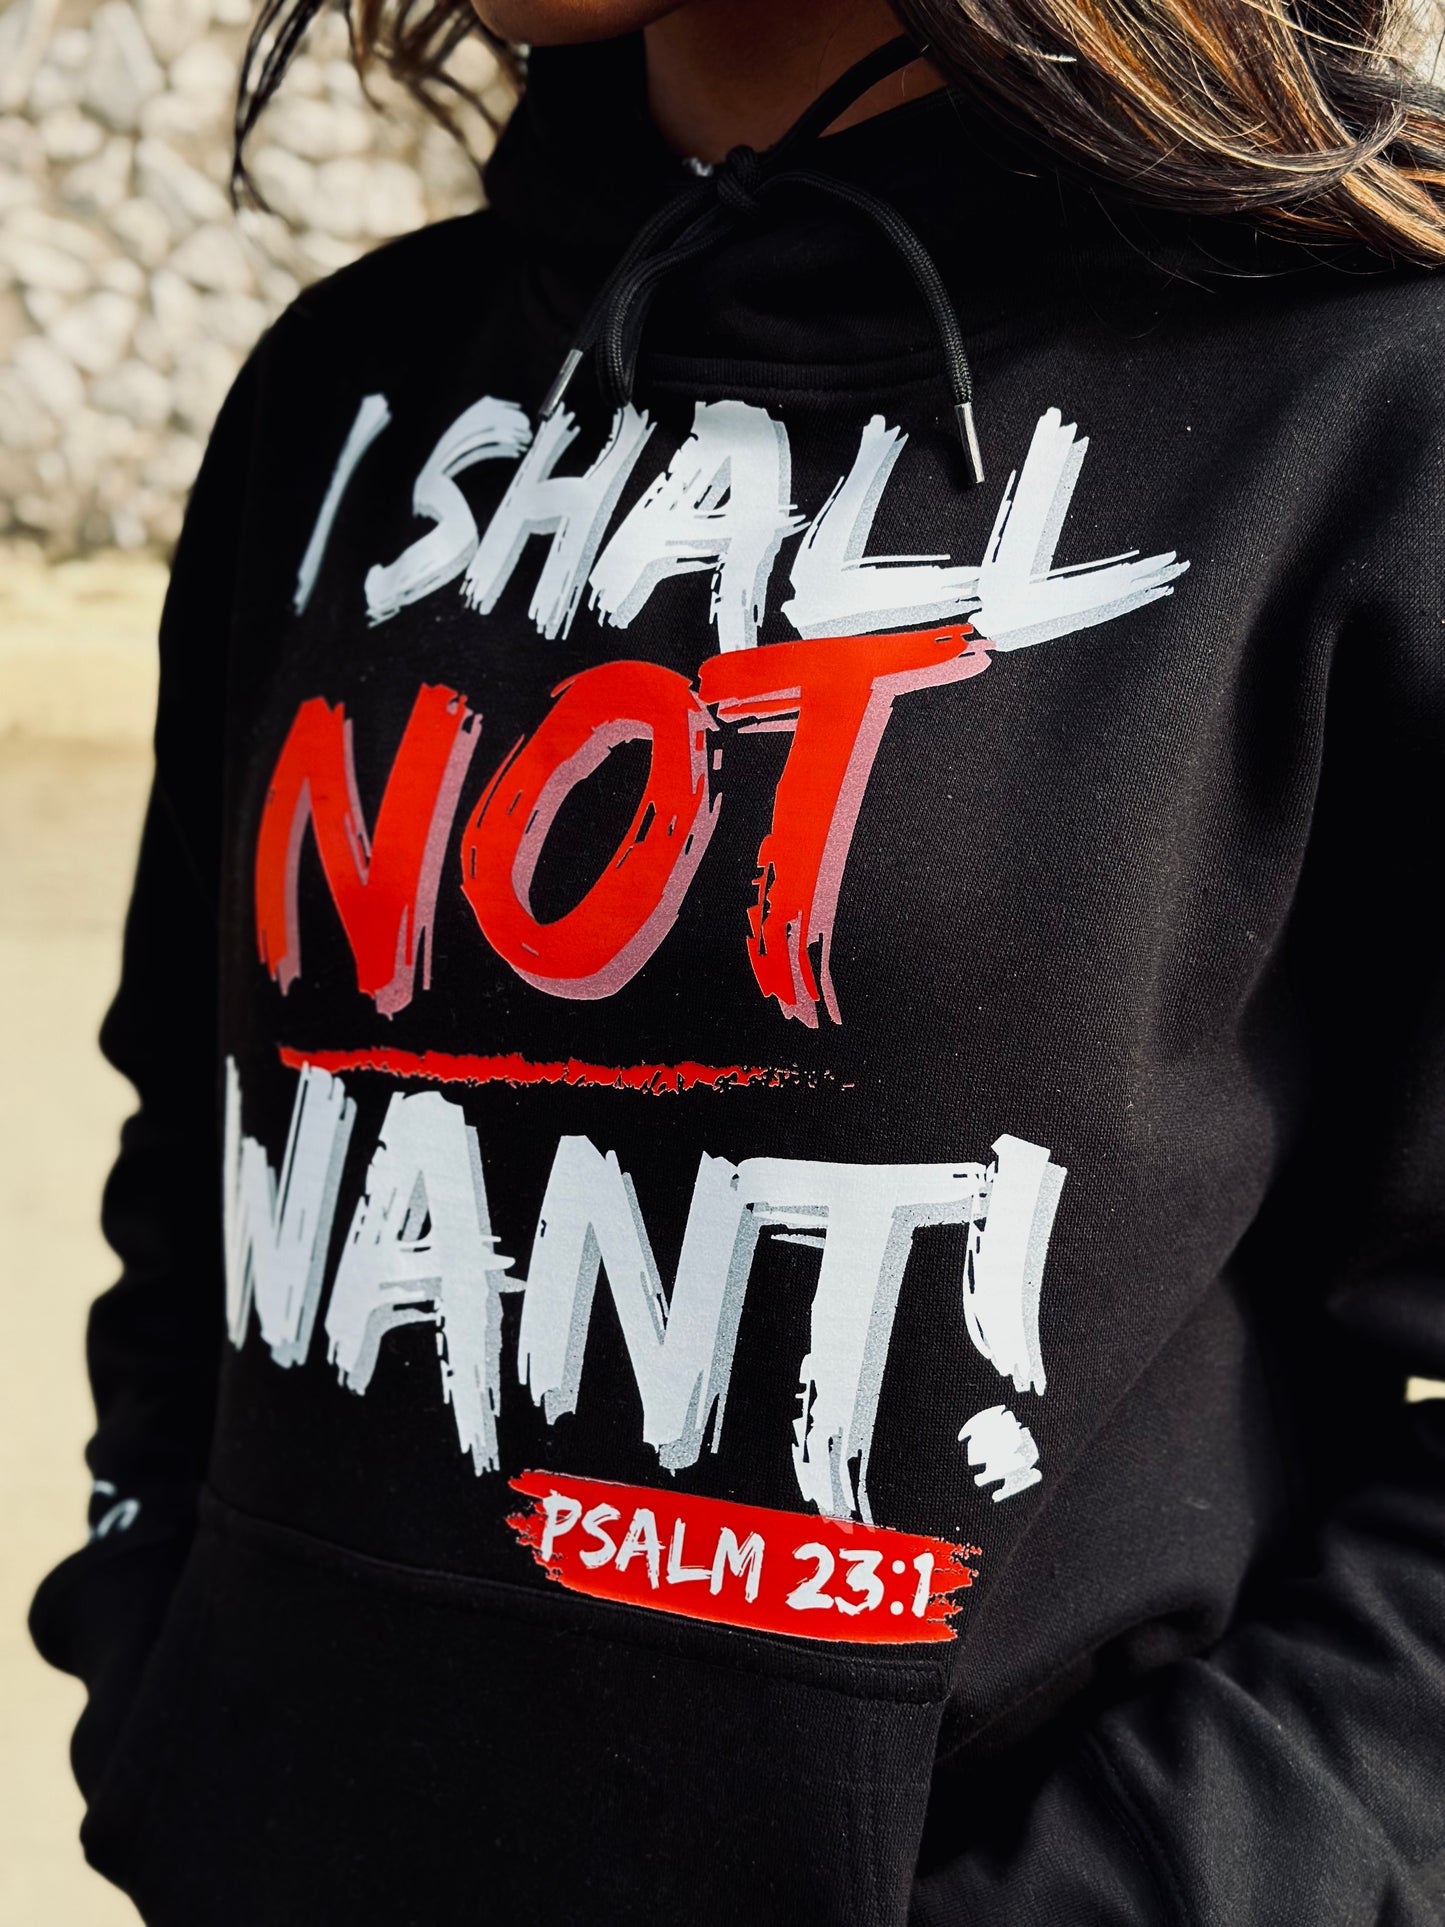 "I Shall Not Want!" Hoodie